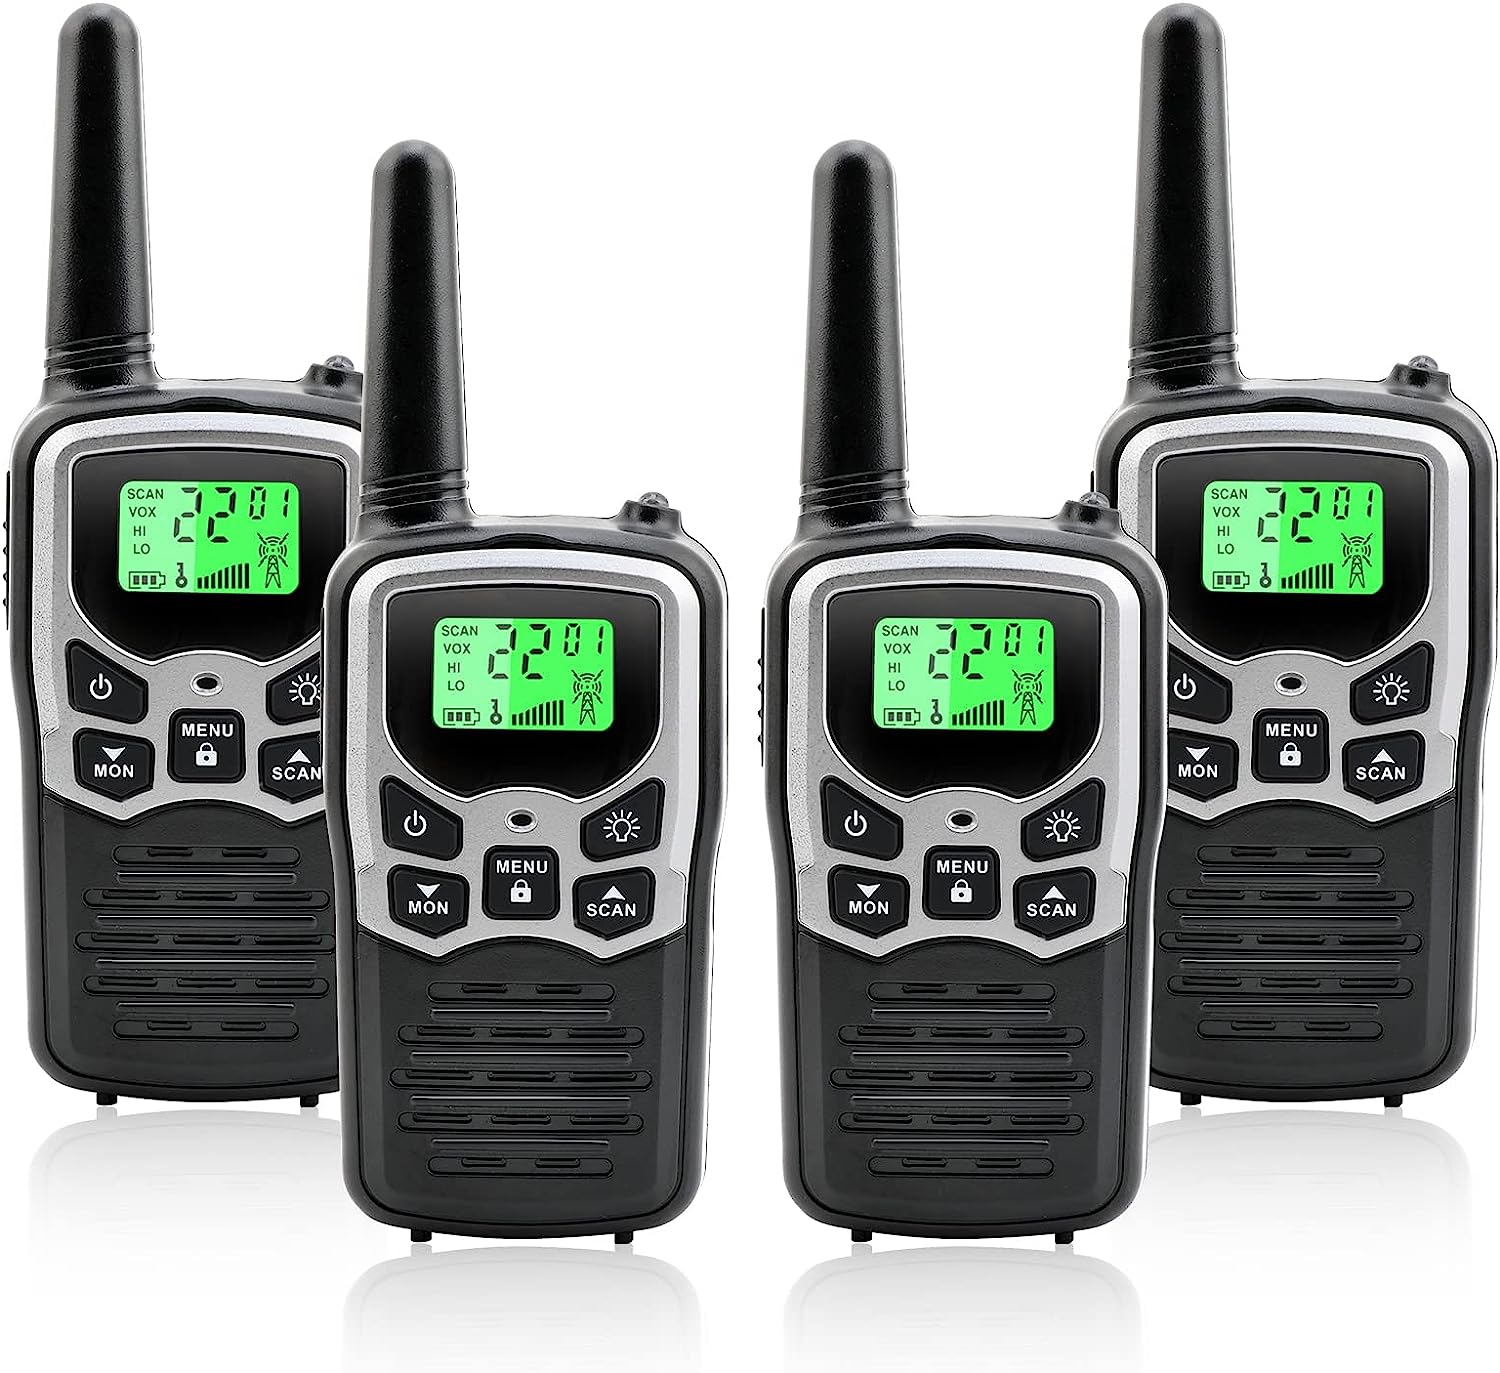 22 FRS Channels, MOICO Walkie Talkies for Adults with [...]